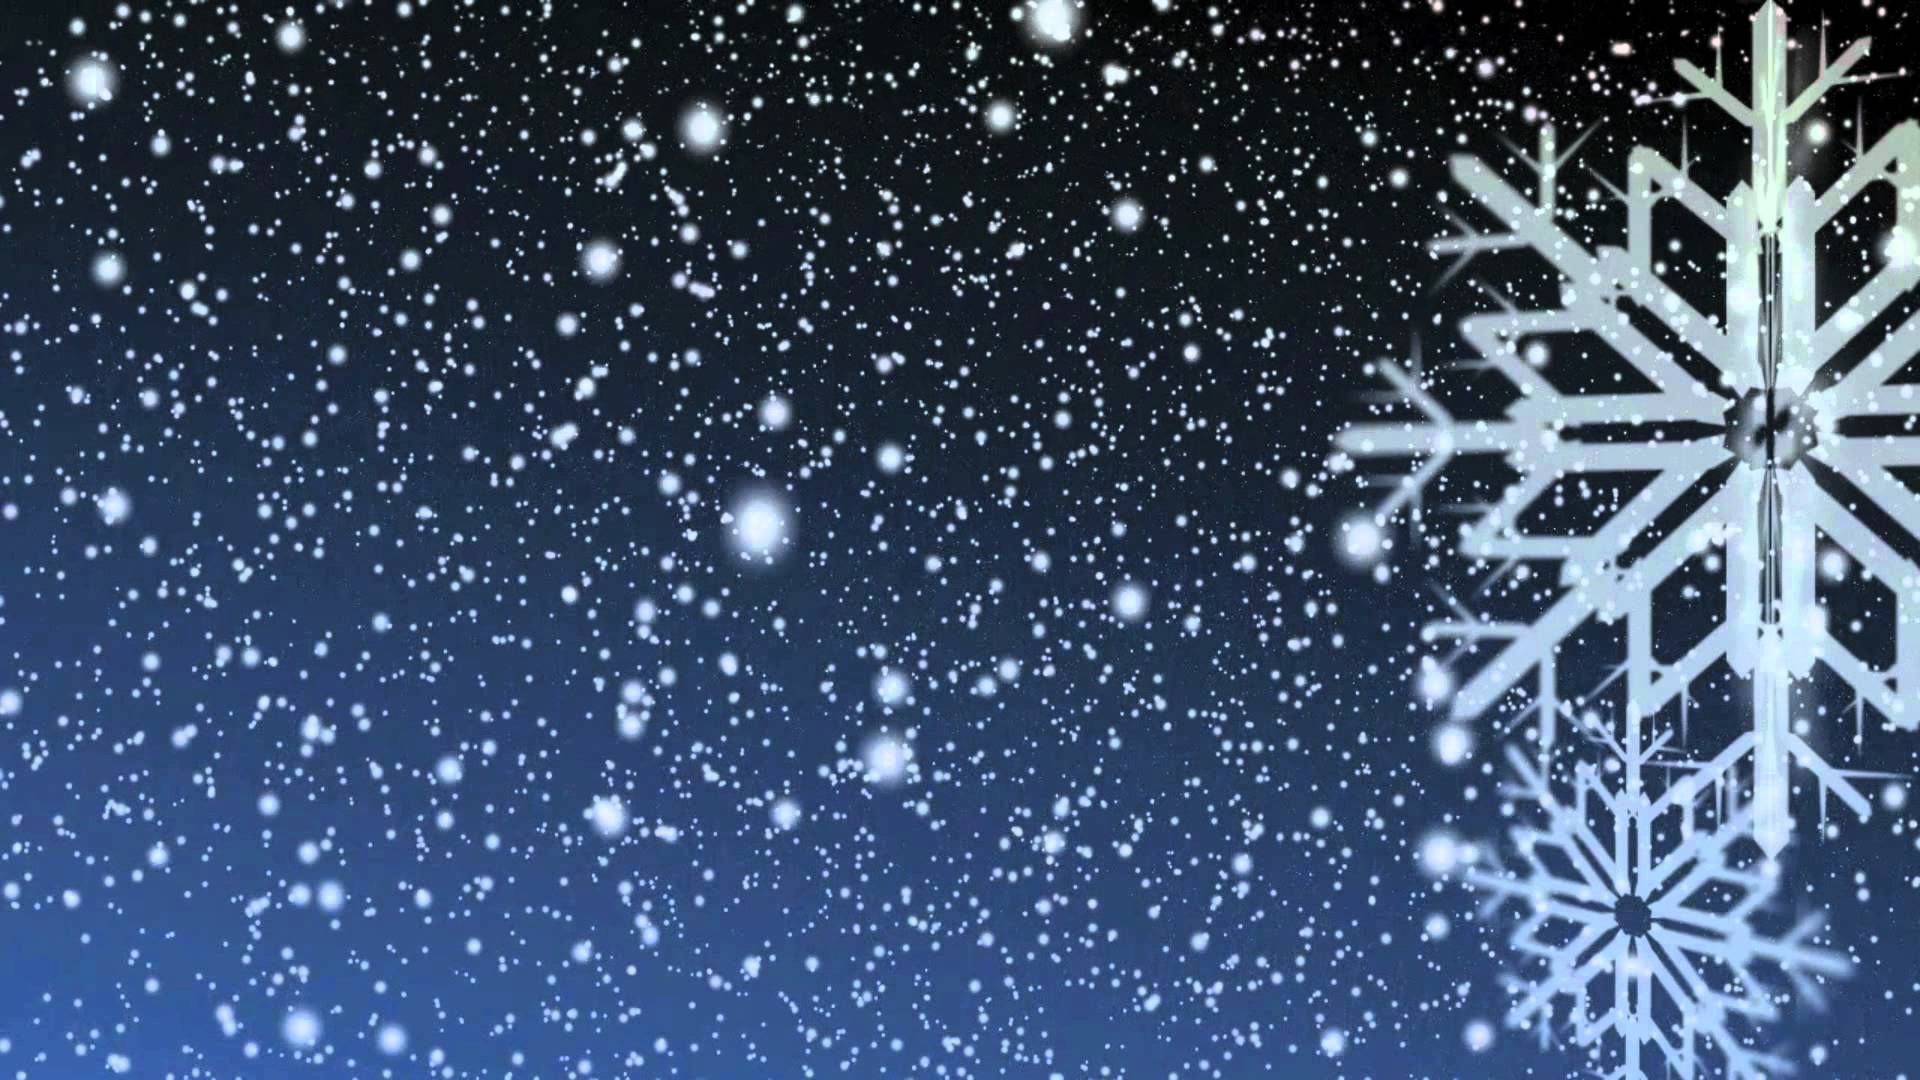 Silhouette is Falling Down. Computer wallpaper, Snowflakes, Snow fairy